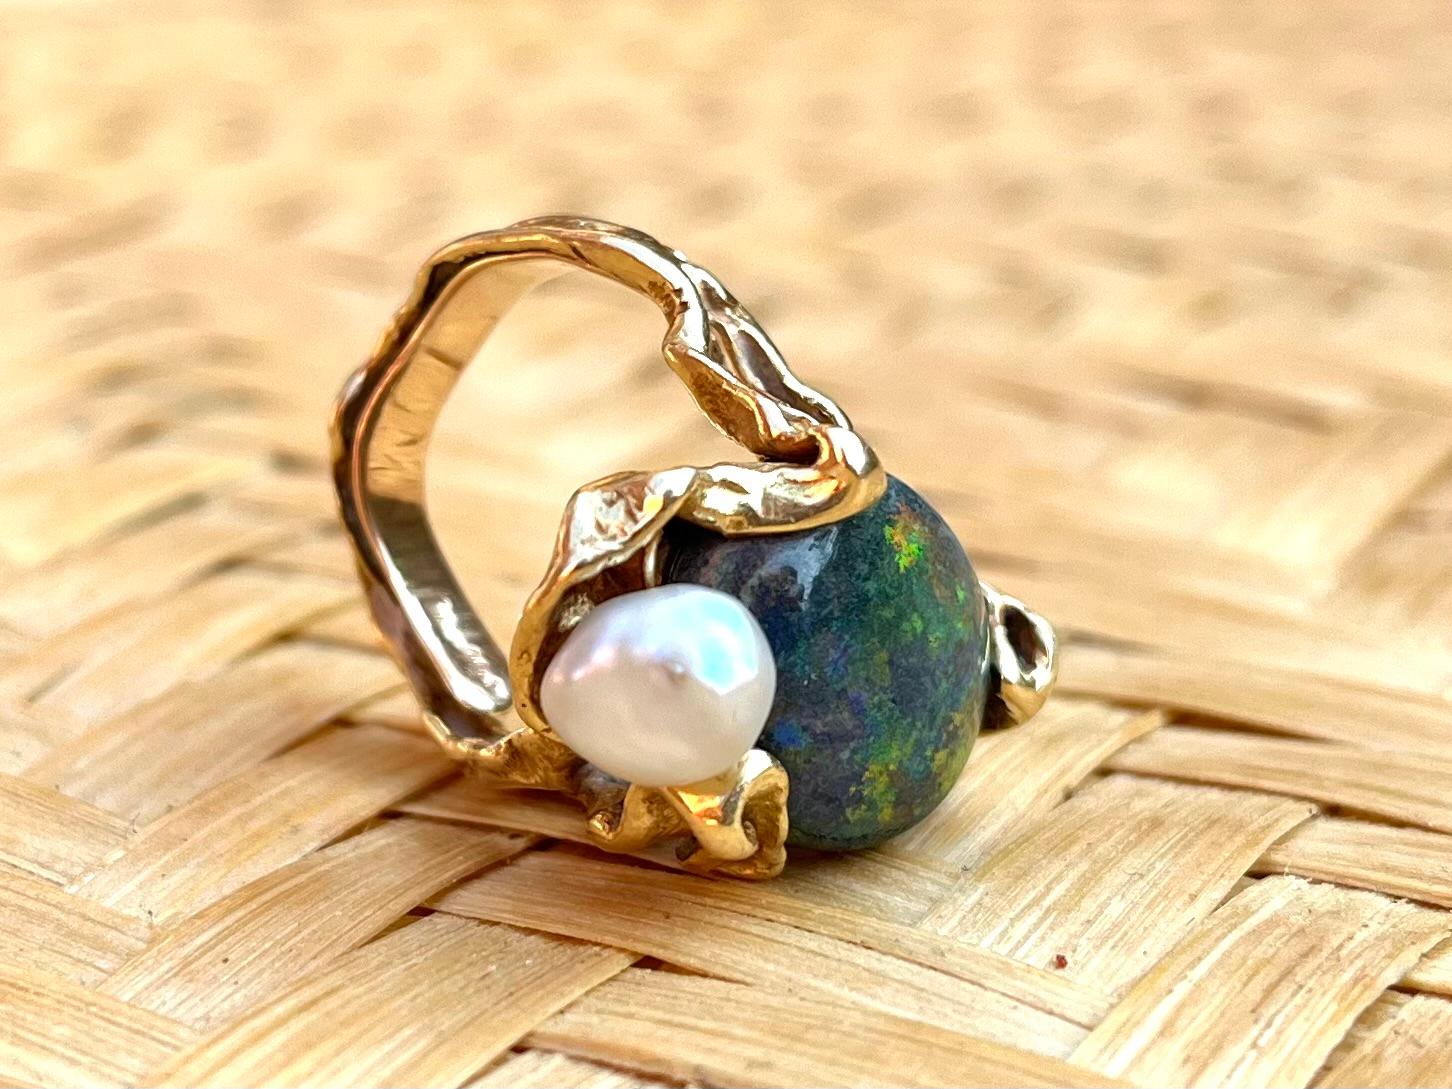 One sculptural ring ornamented with an opal and a baroque pearl - Switzerland, Circa 1980 - 18K Gold - Signed Gilbert Albert